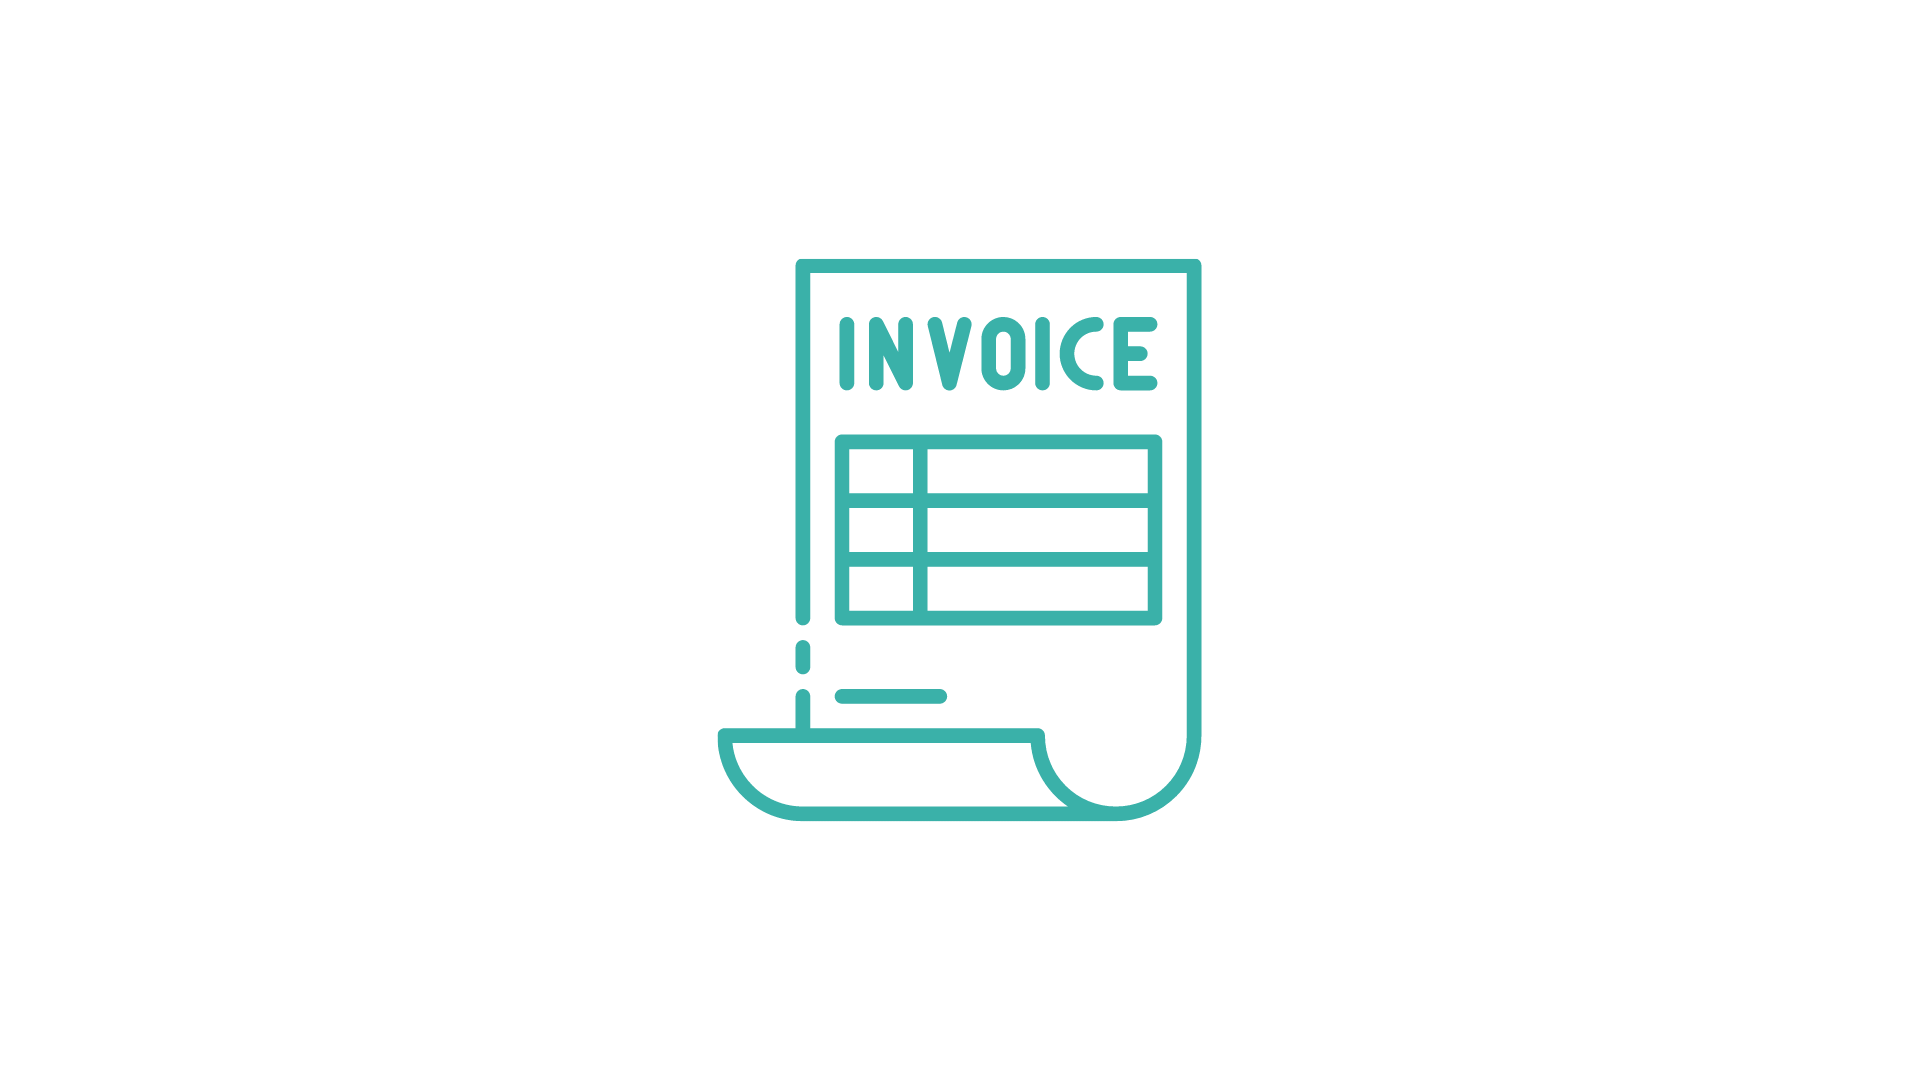 How to post a sales invoice and a purchase invoice?